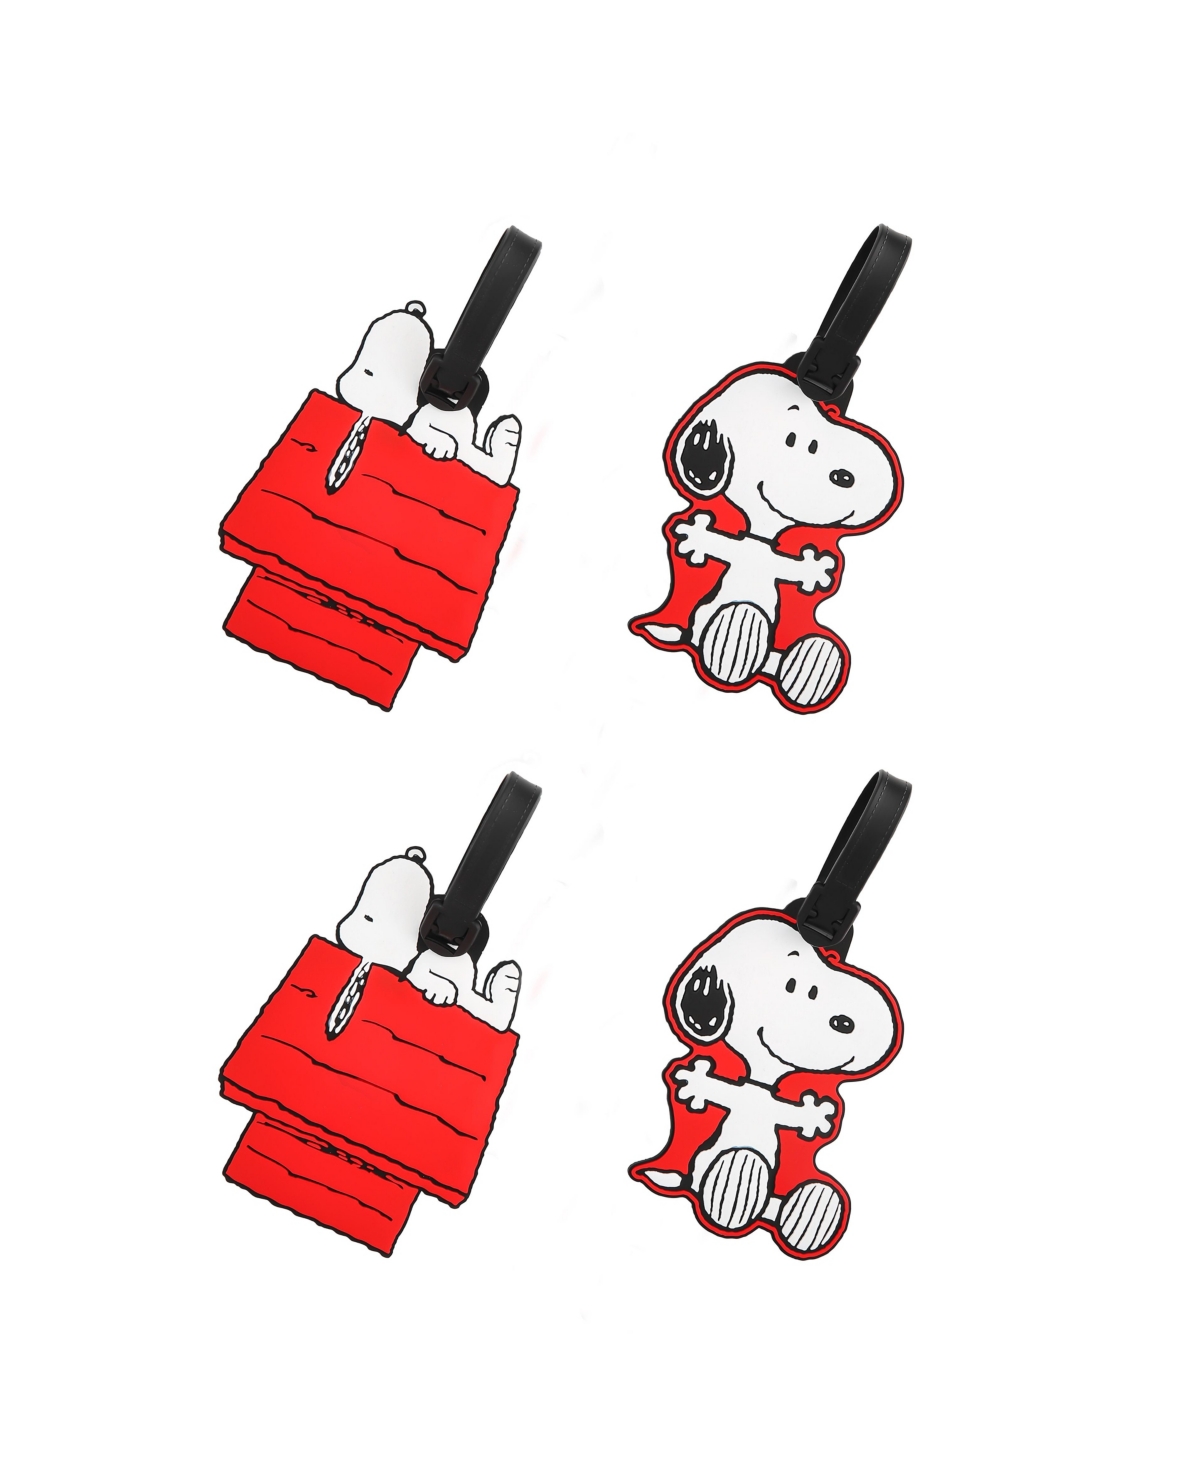 Snoopy Luggage Tag Snoopy Pvc Travel Tags Gifts - Set of 4 - Red, white